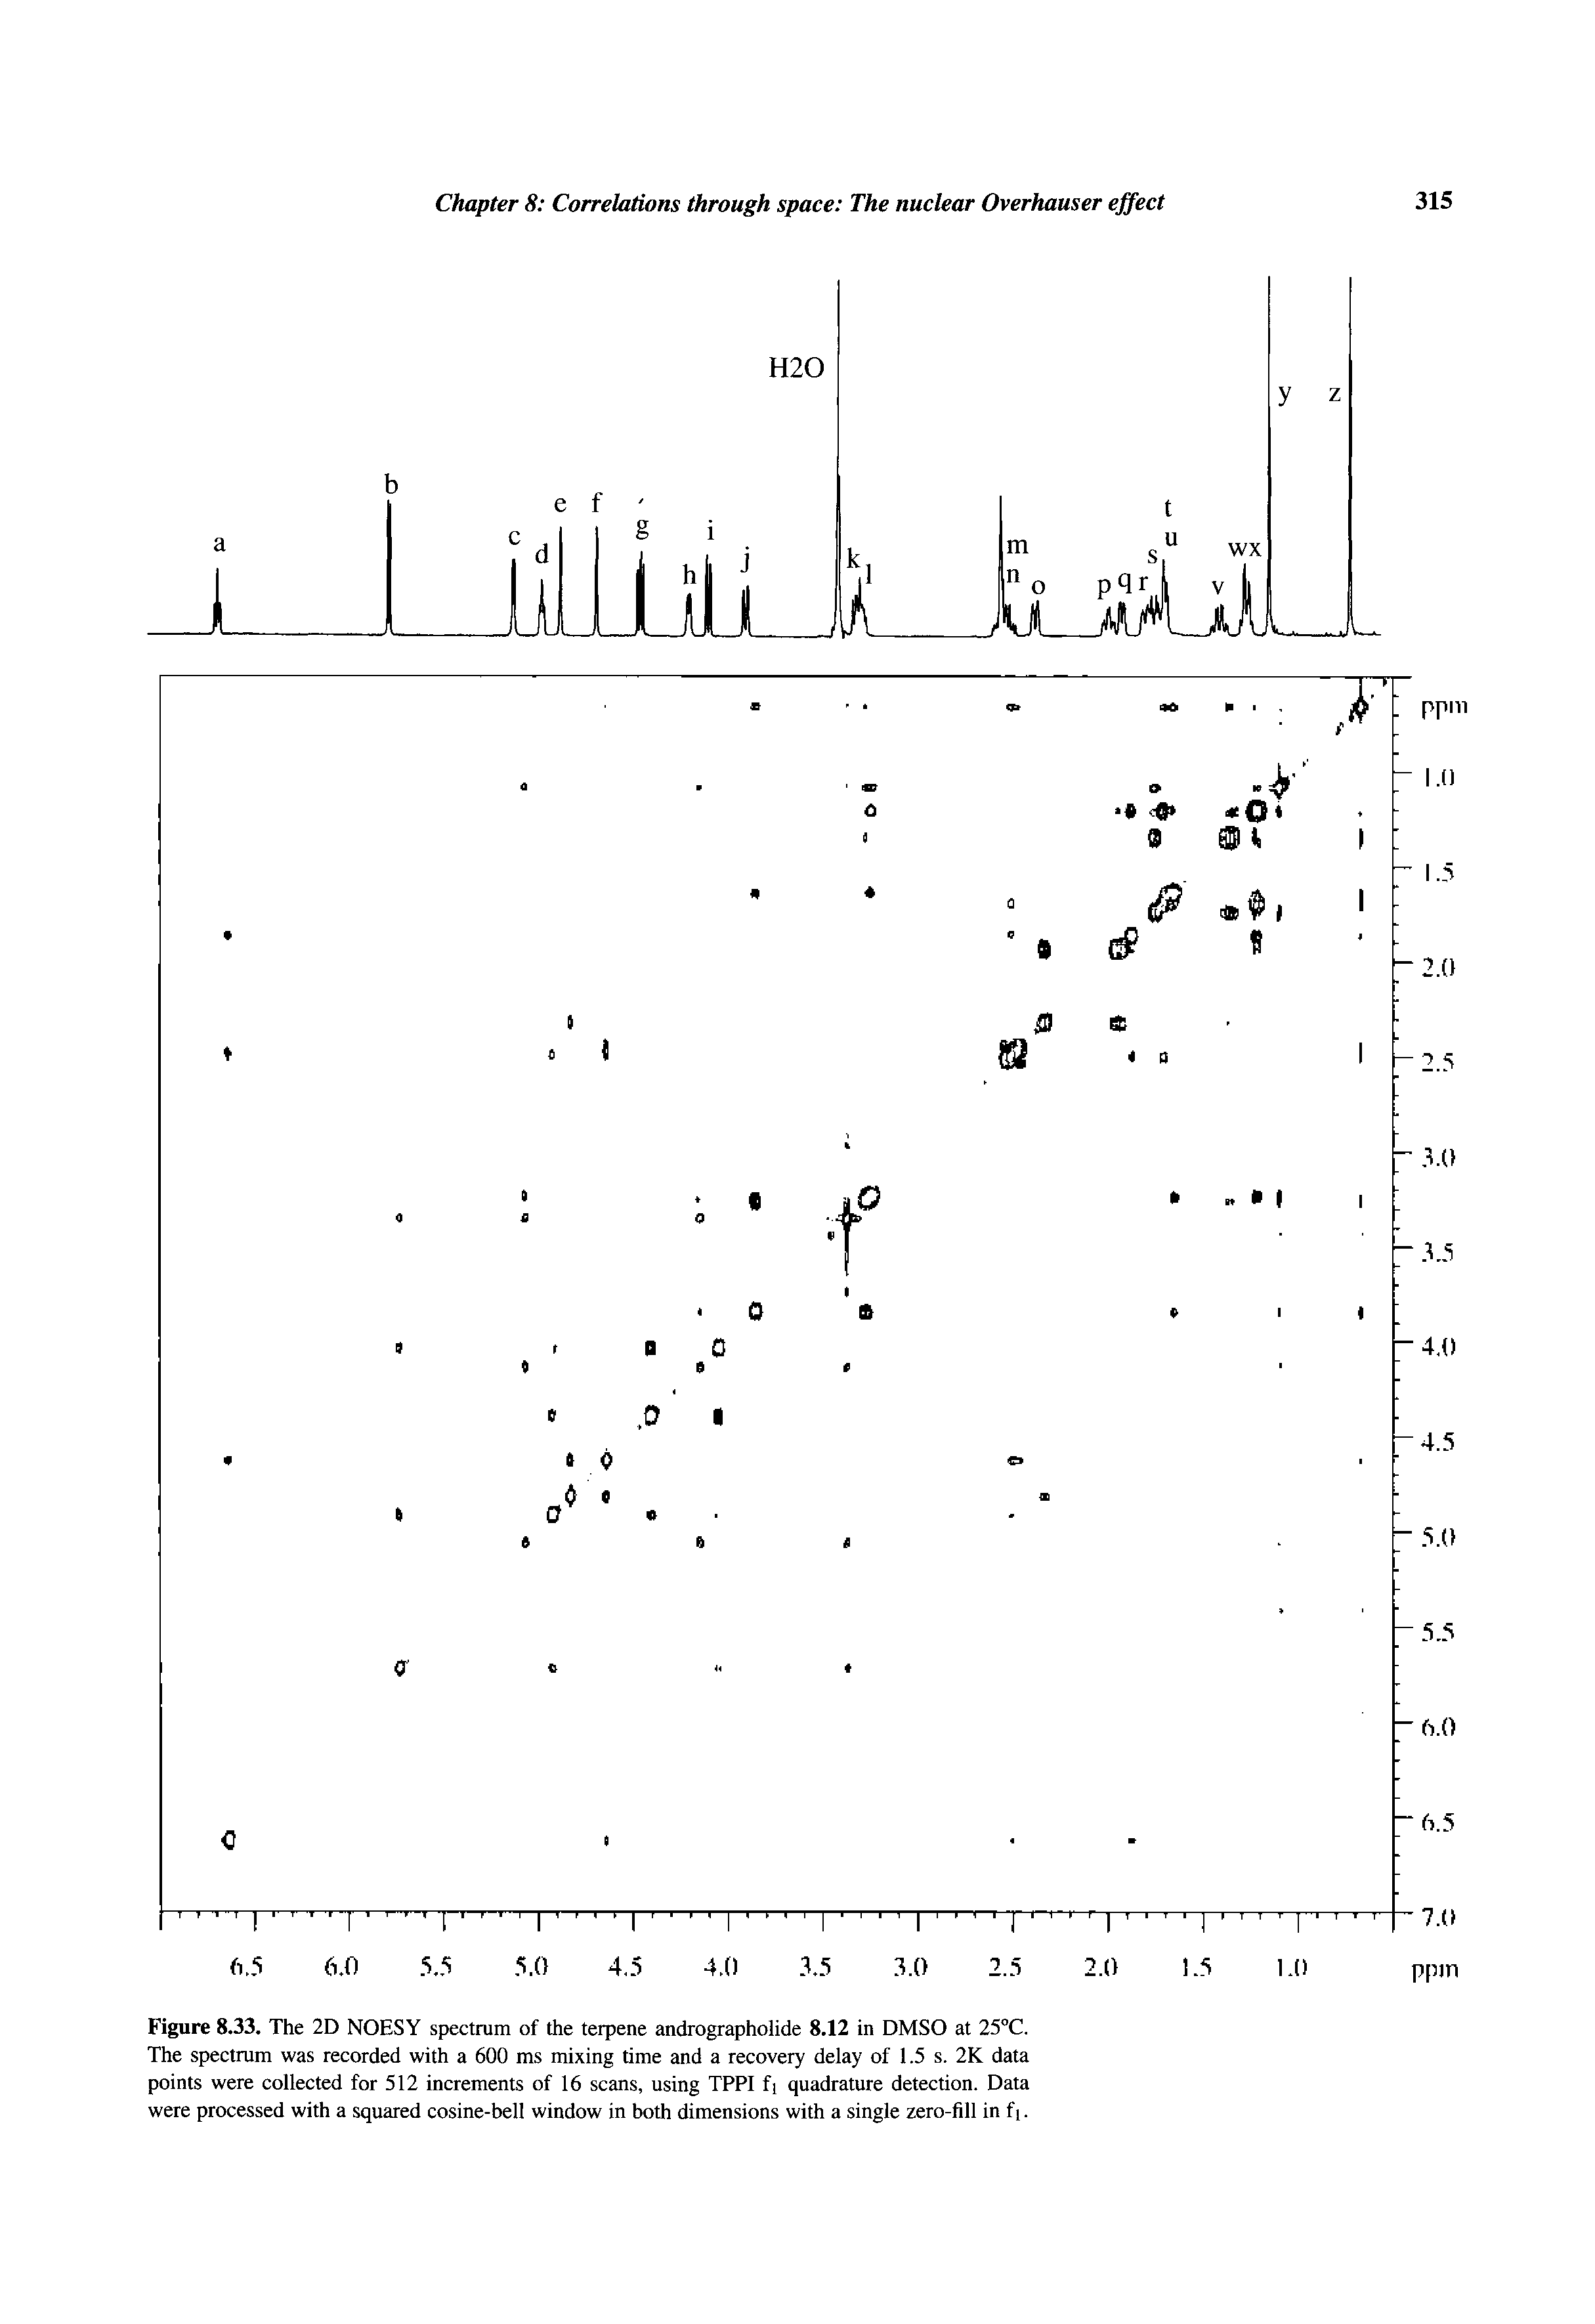 Figure 8.33. The 2D NOESY spectrum of the terpene andrographolide 8.12 in DMSO at 25°C. The spectrum was recorded with a 600 ms mixing time and a recovery delay of 1.5 s. 2K data points were collected for 512 increments of 16 scans, using TPPI fi quadrature detection. Data were processed with a squared cosine-bell window in both dimensions with a single zero-fill in f[.